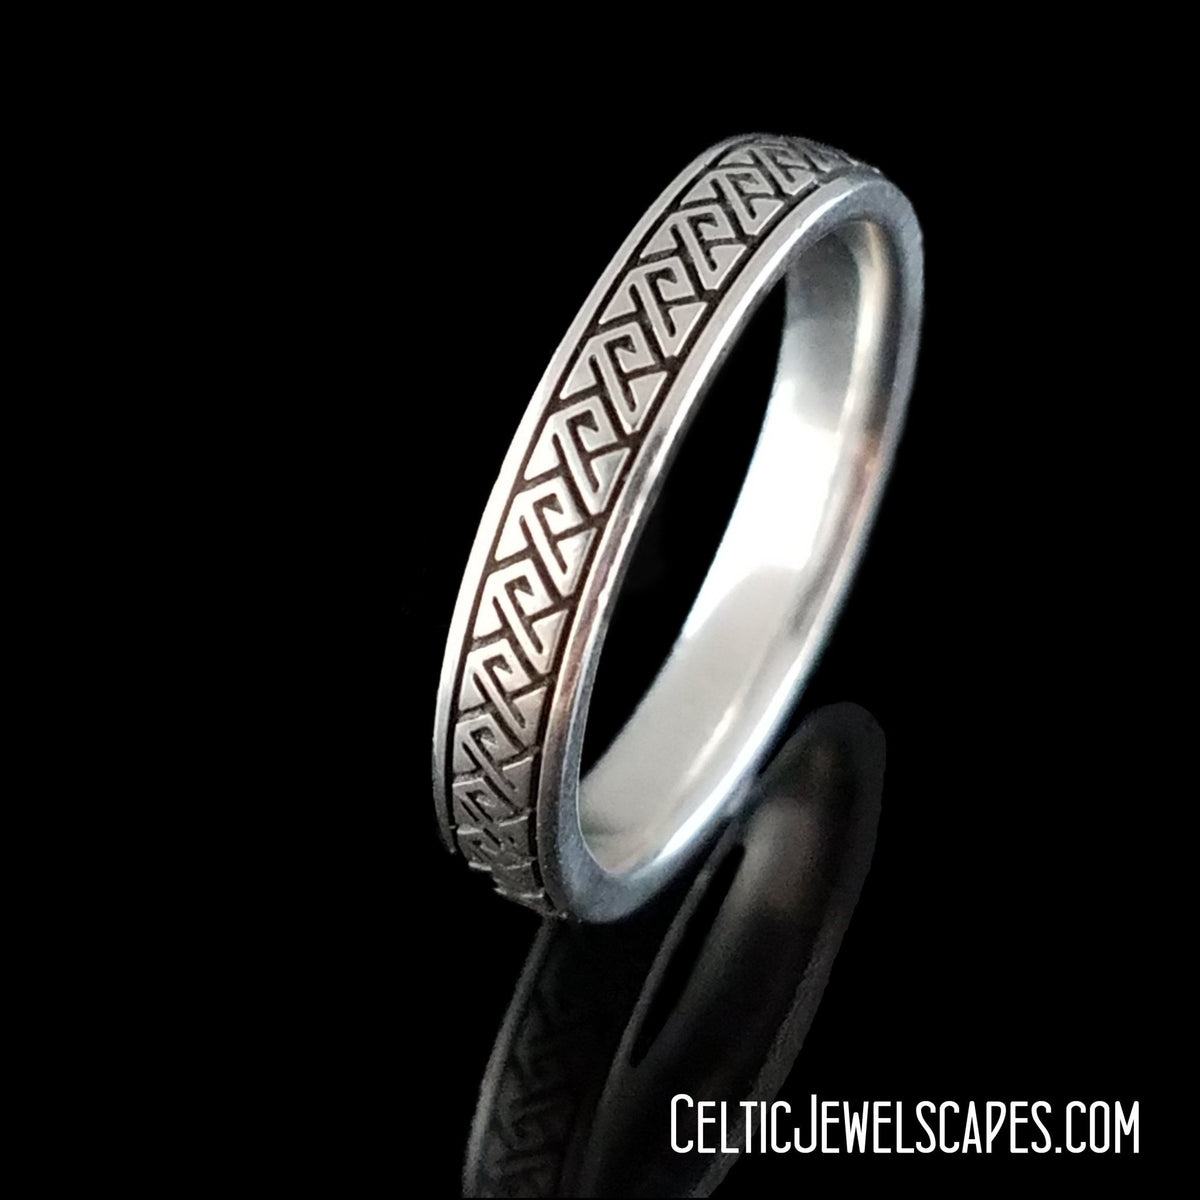 DURROW Narrow Starting at $139 - Celtic Jewelscapes